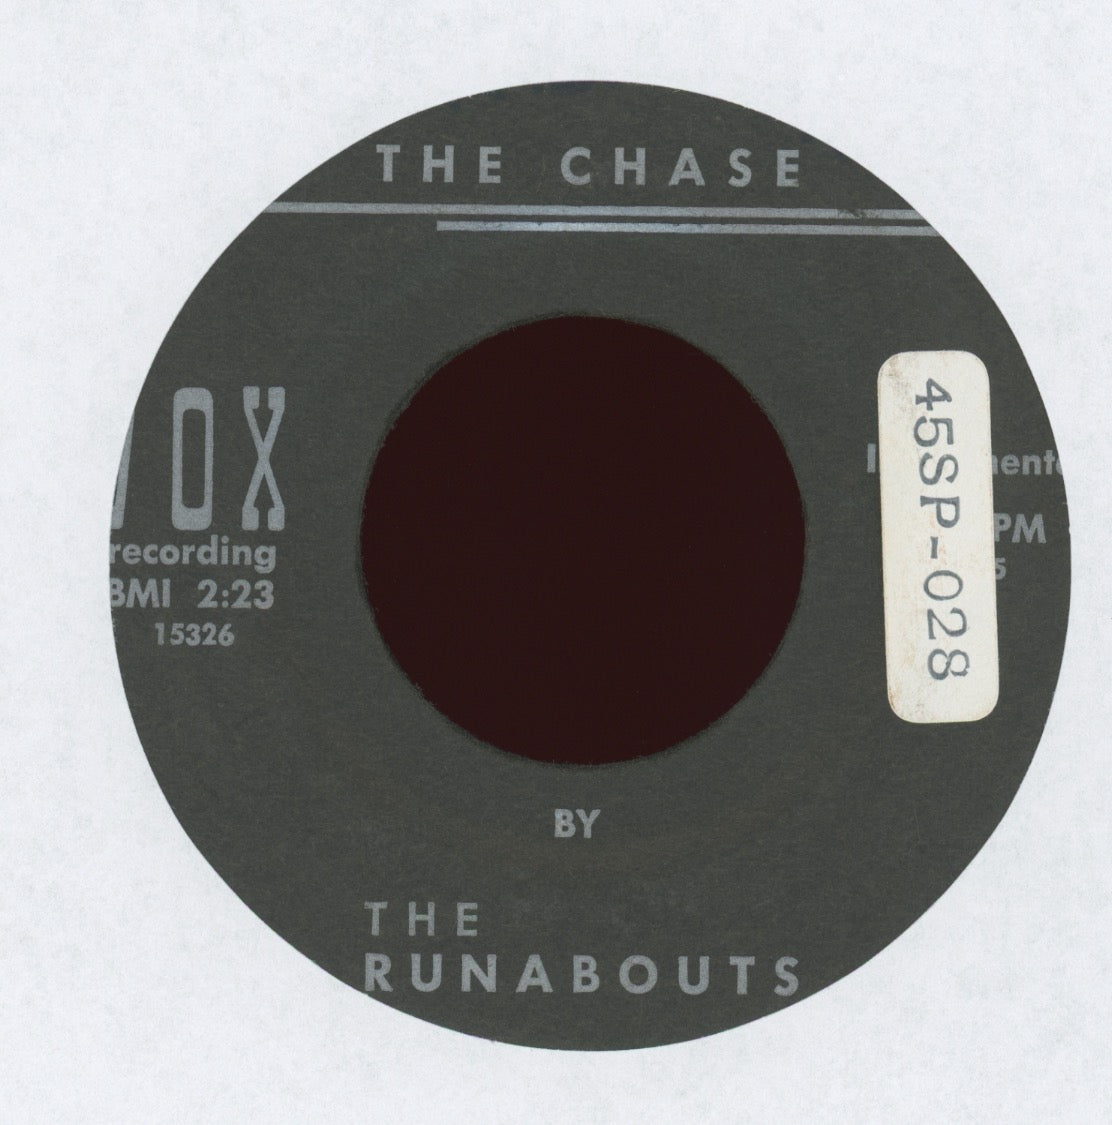 The Runabouts - I Need Time on Vox